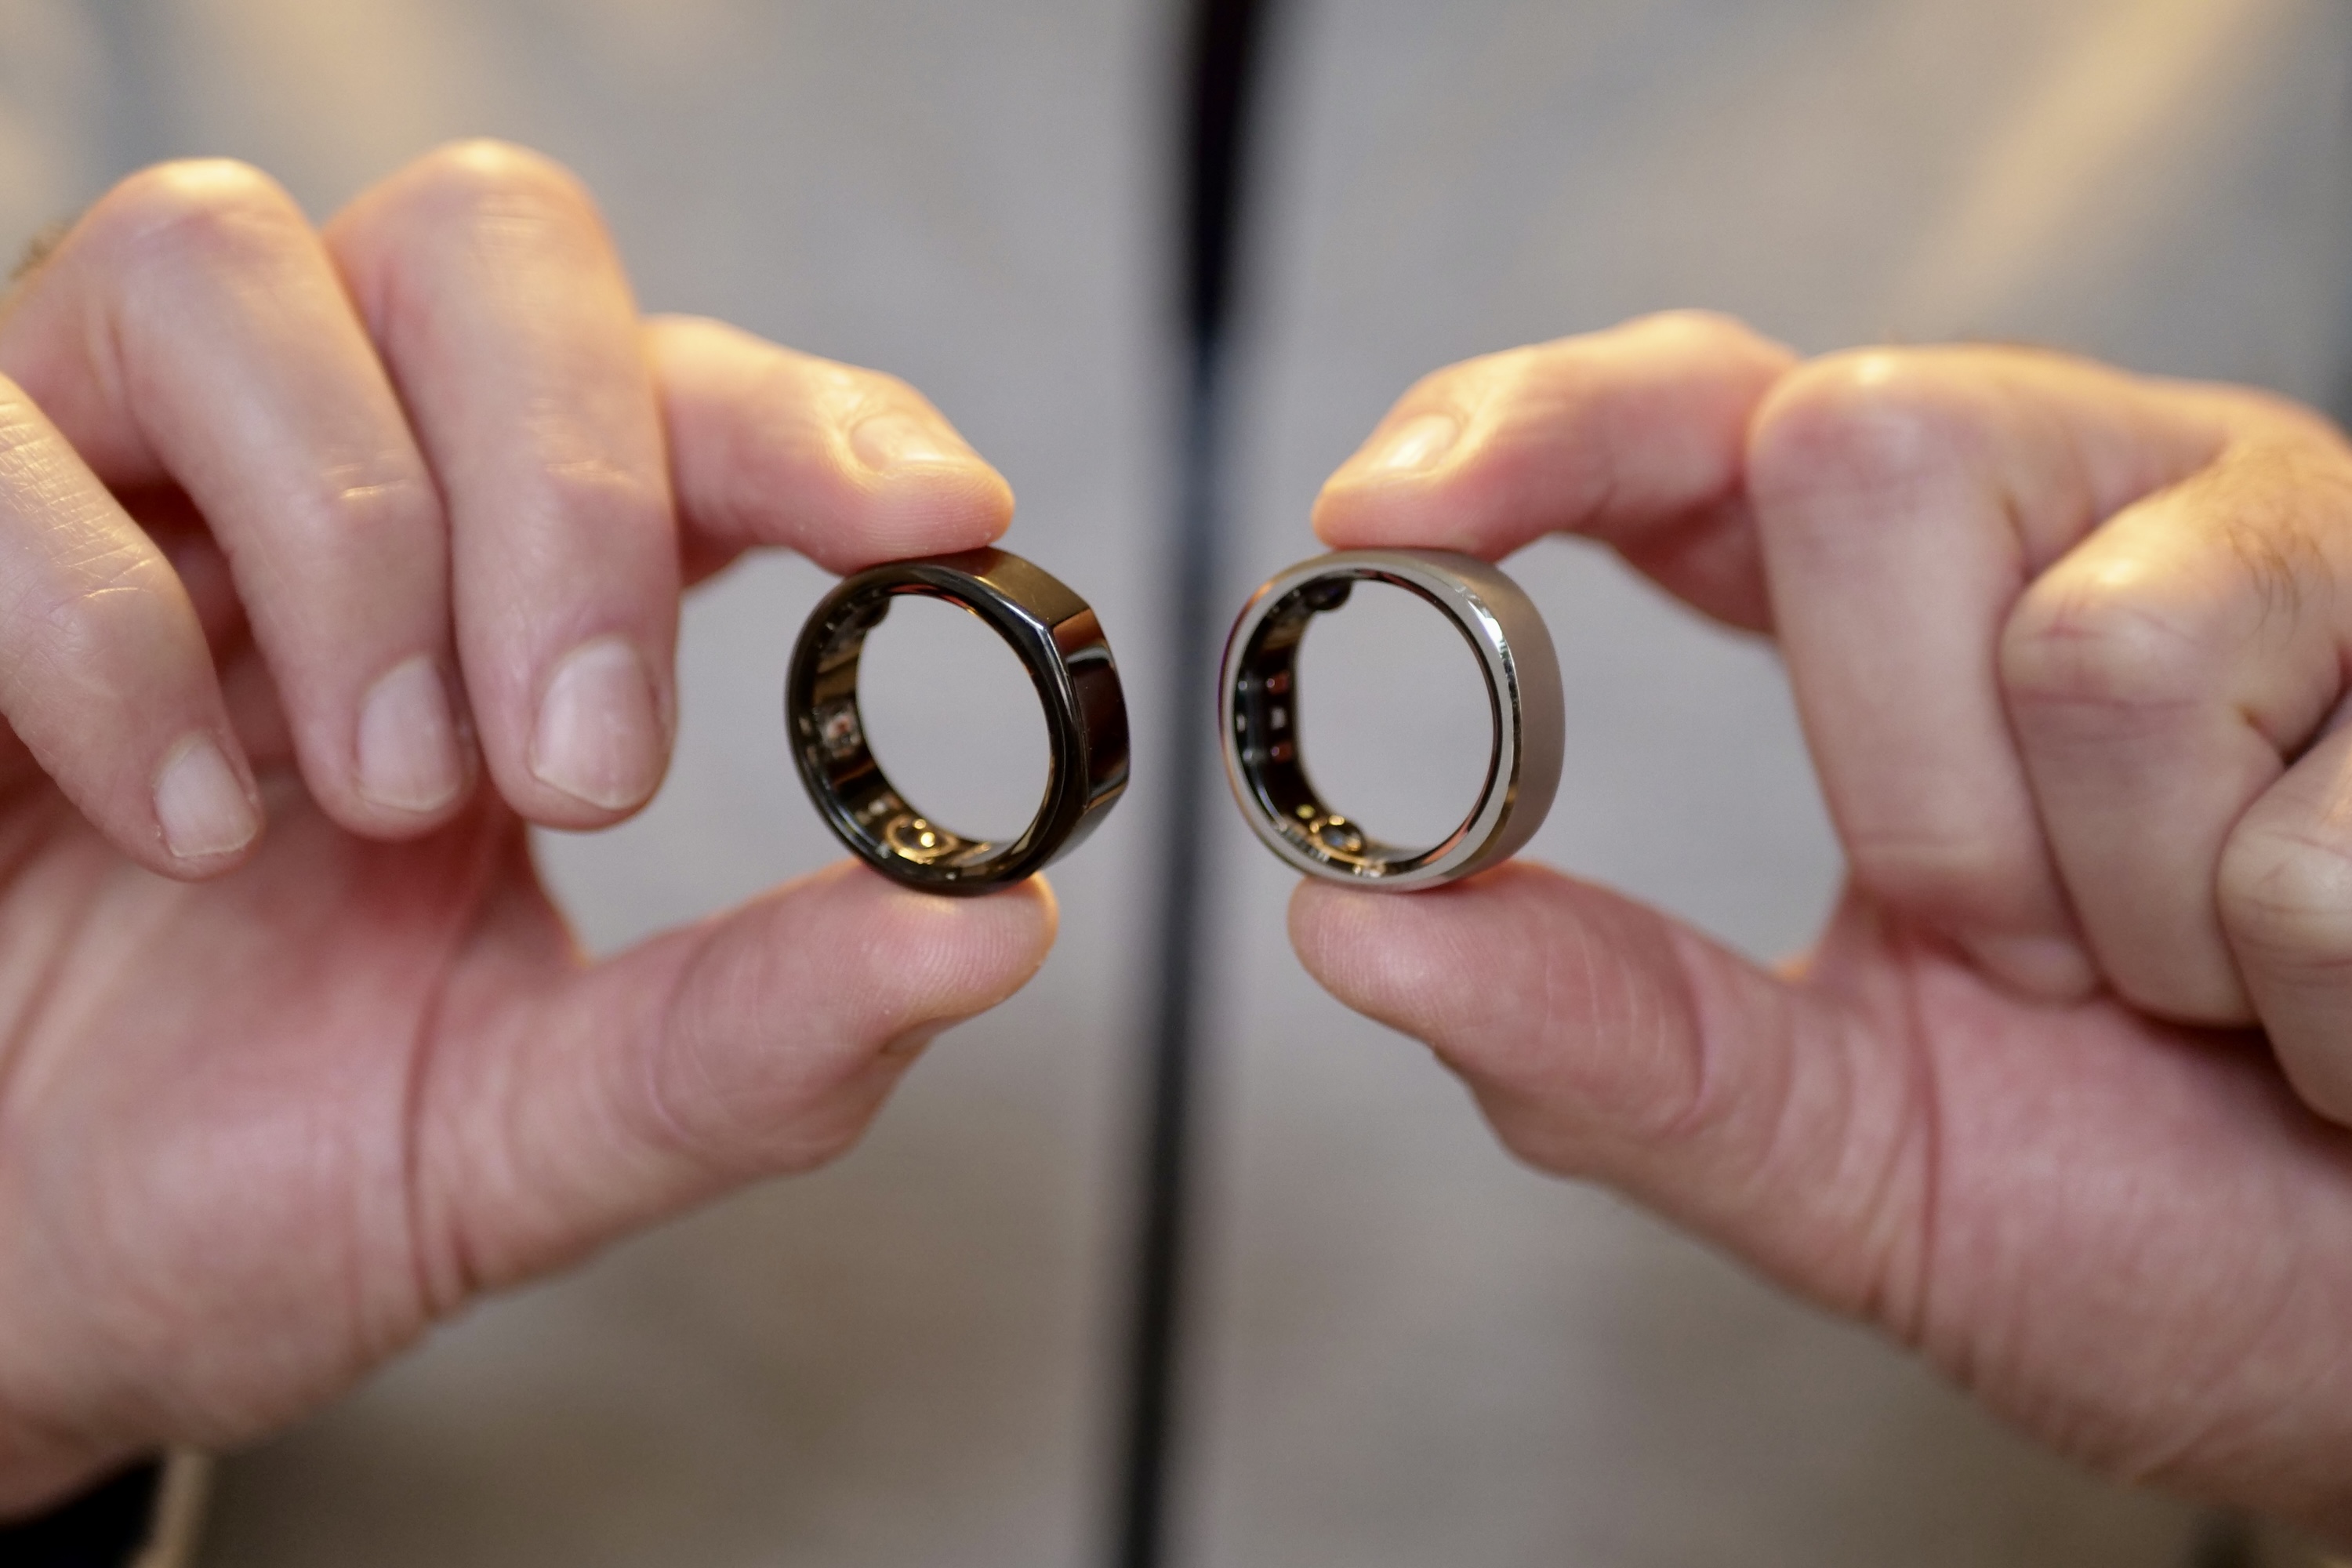 What Are Smart Rings? How Do They Work?